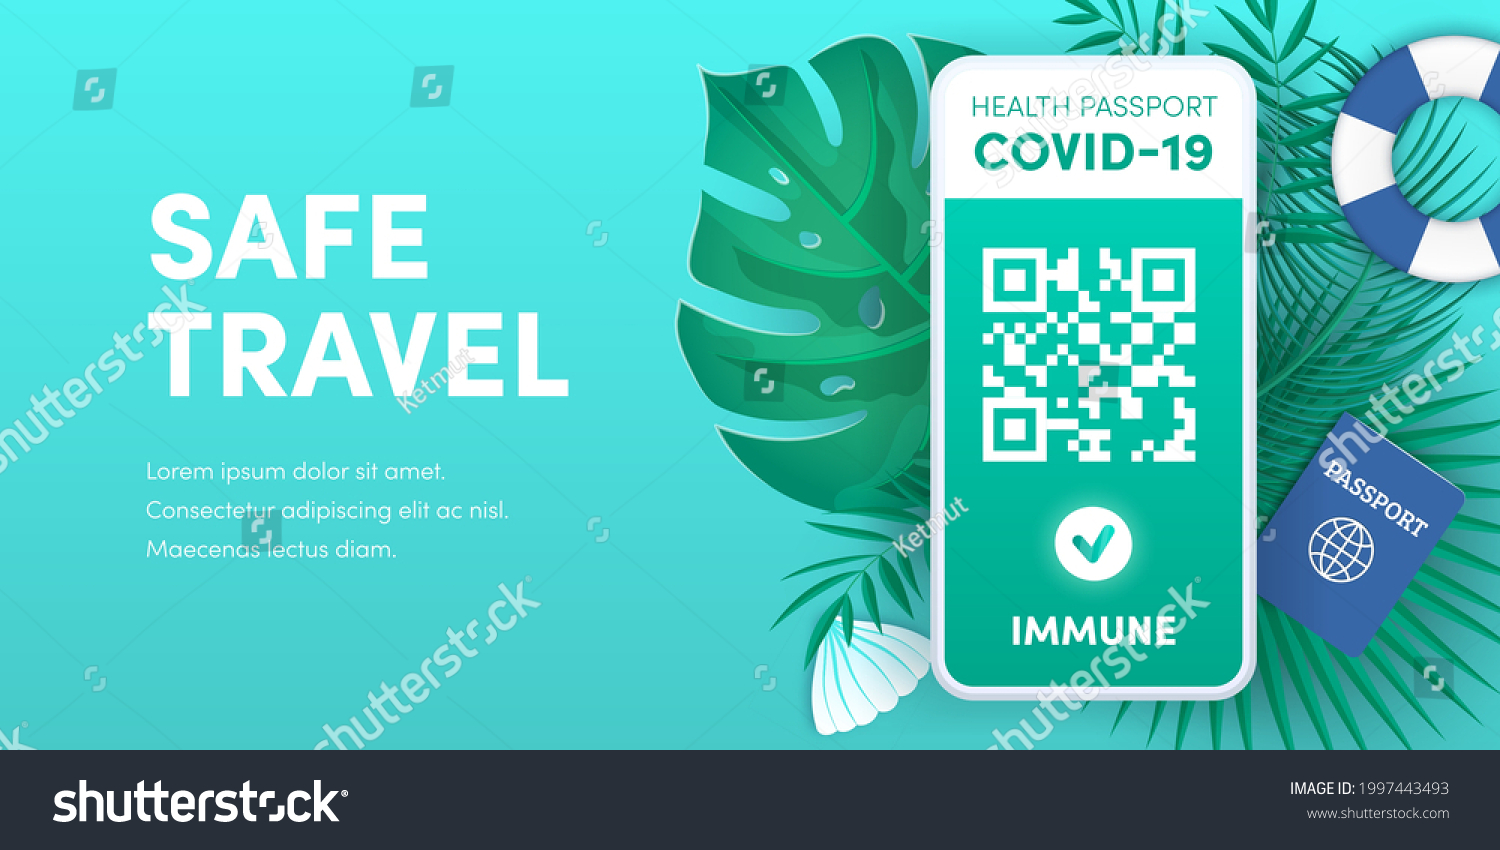 Health pass app for safe travel. Electronic Covid-19 immunity passport QR code on smartphone screen vector banner. Vaccination or negative coronavirus test green valid certificate on mobile phone. #1997443493